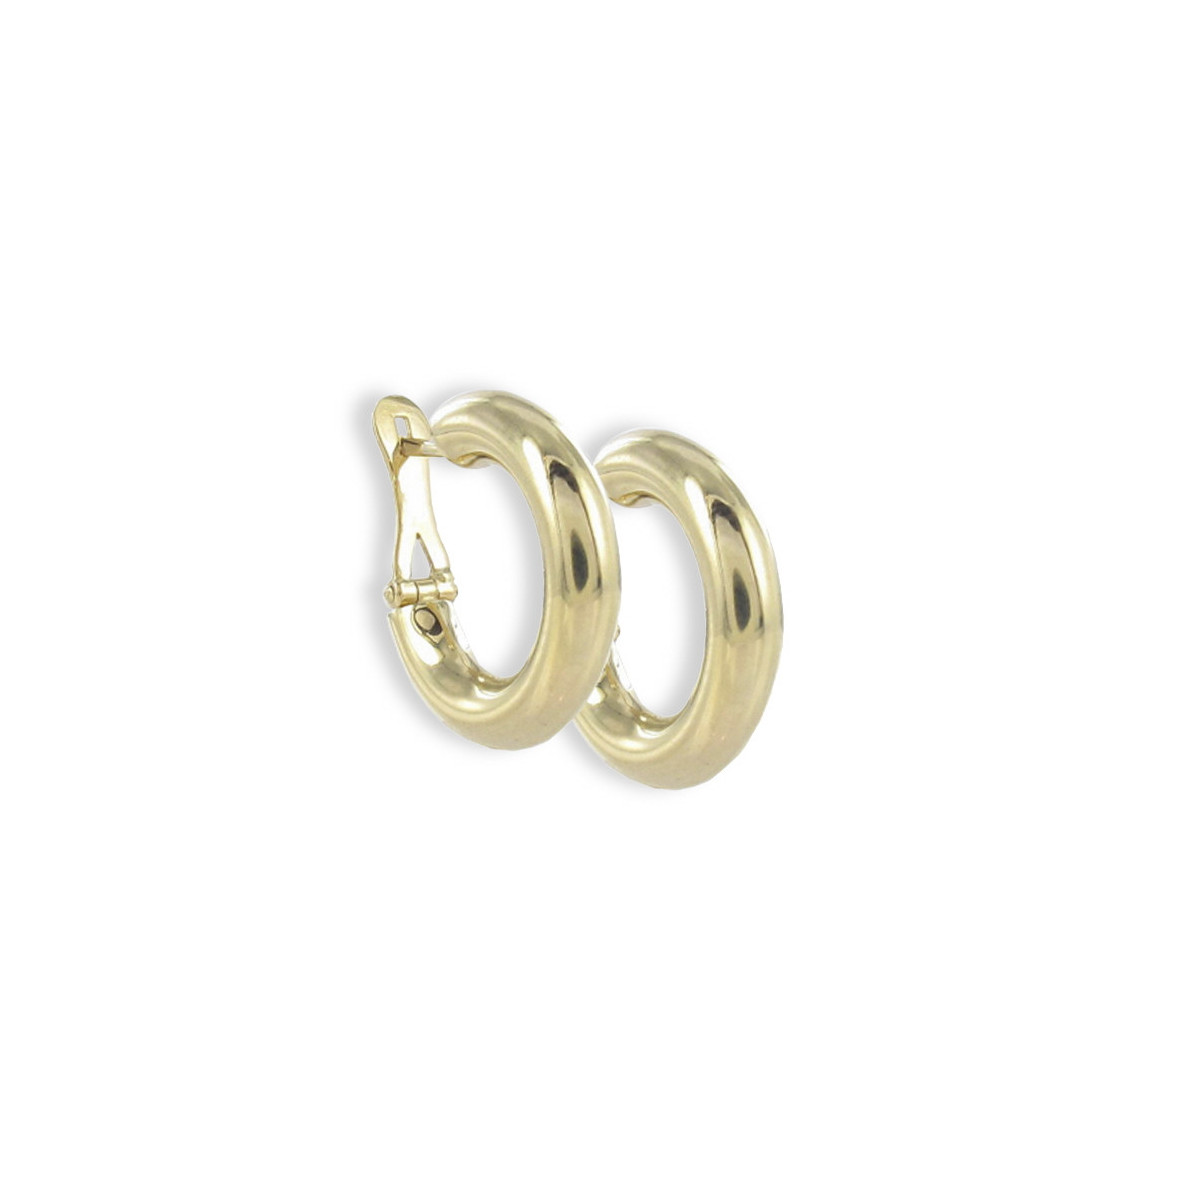 BRIGHT YELLOW GOLD EARRINGS